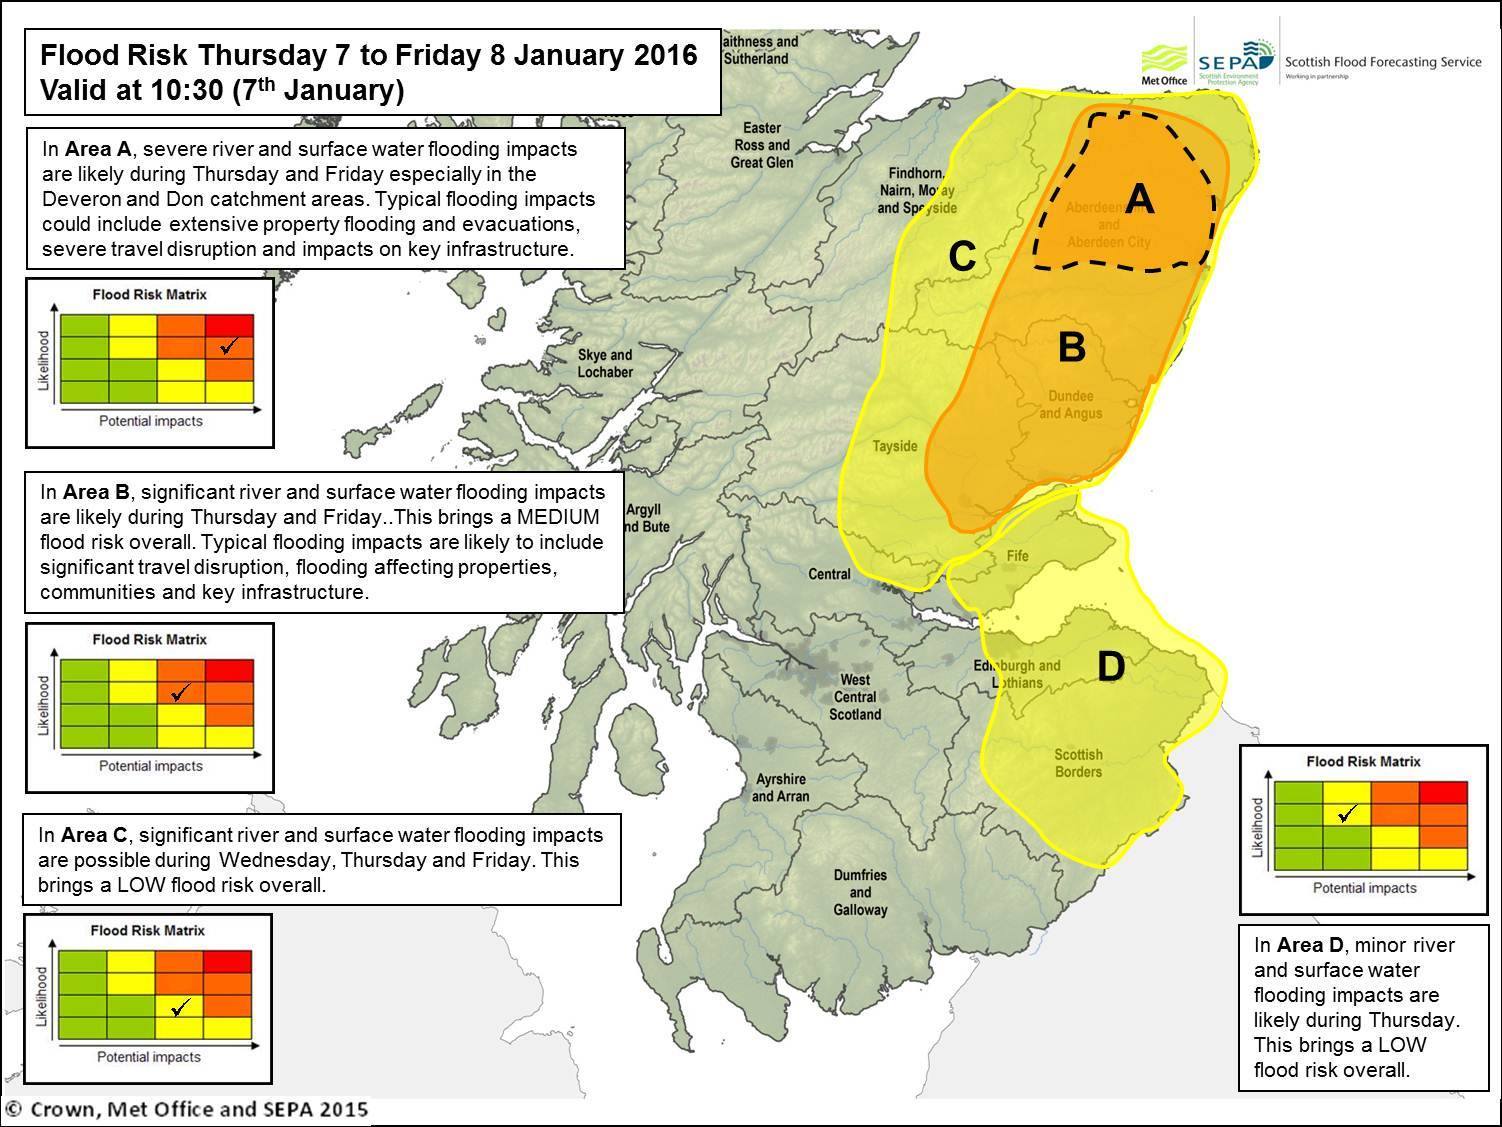 SEPA's 'Area of Concern map' for today's flood outlook